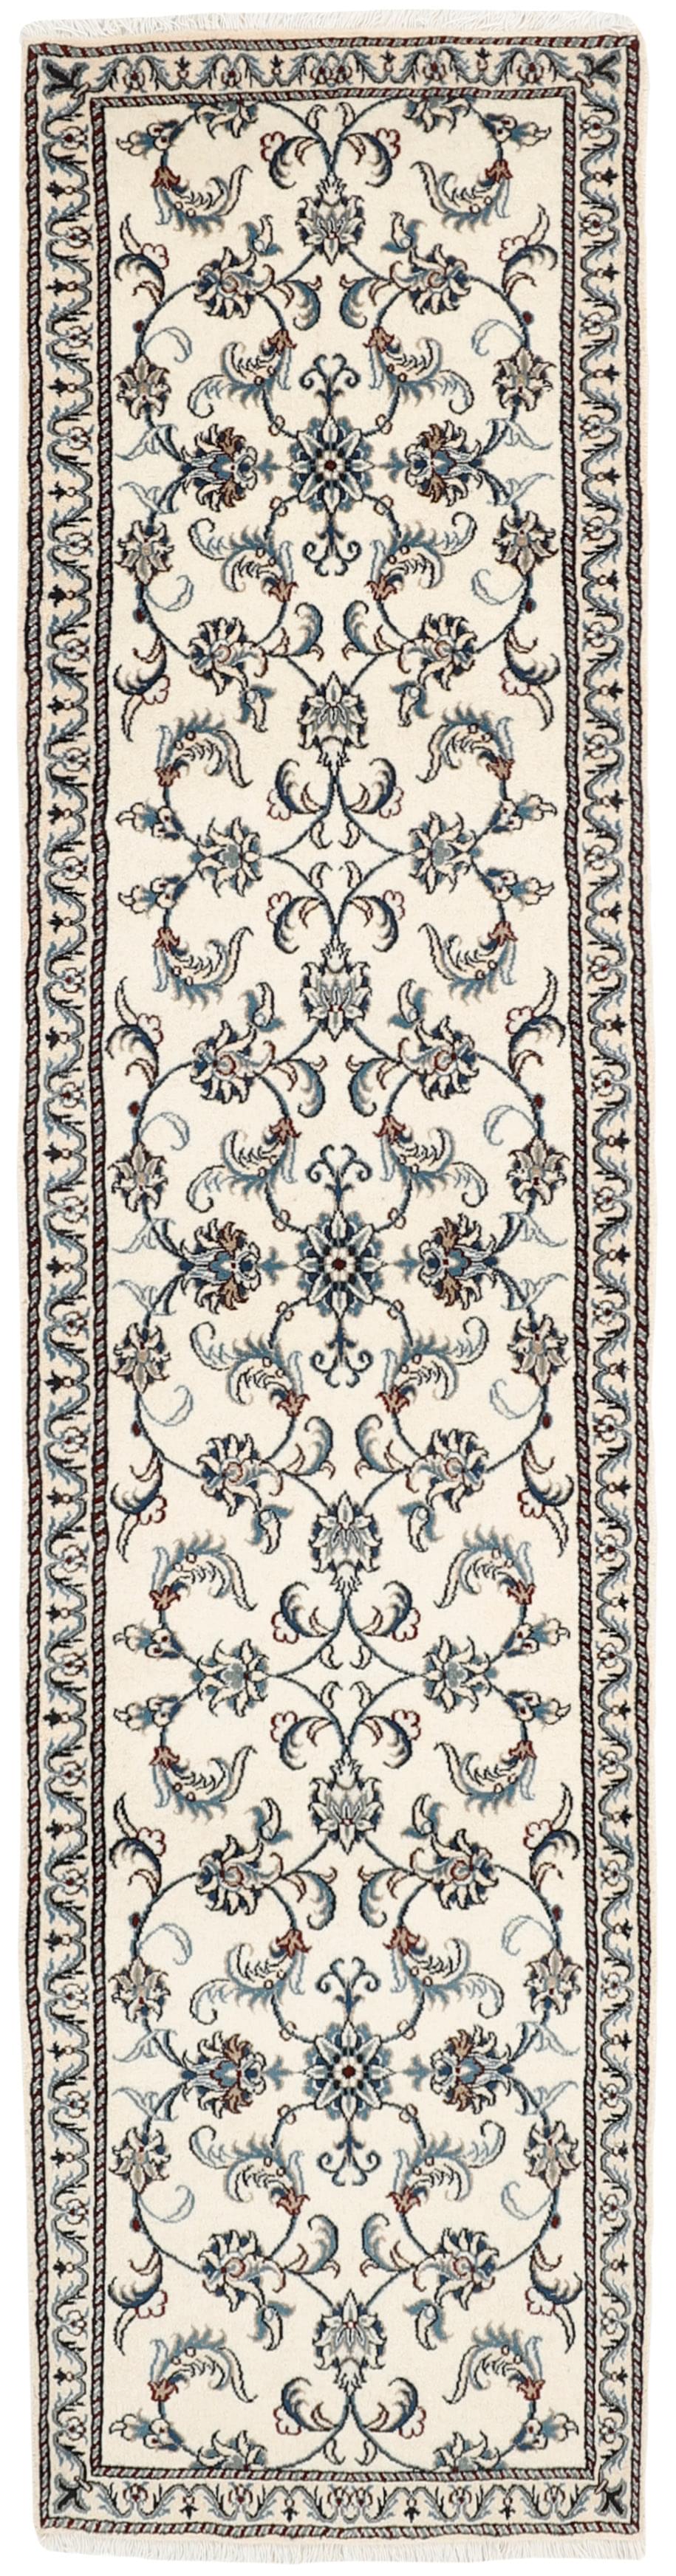 authentic persian runner with cream, beige, blue and brown floral design